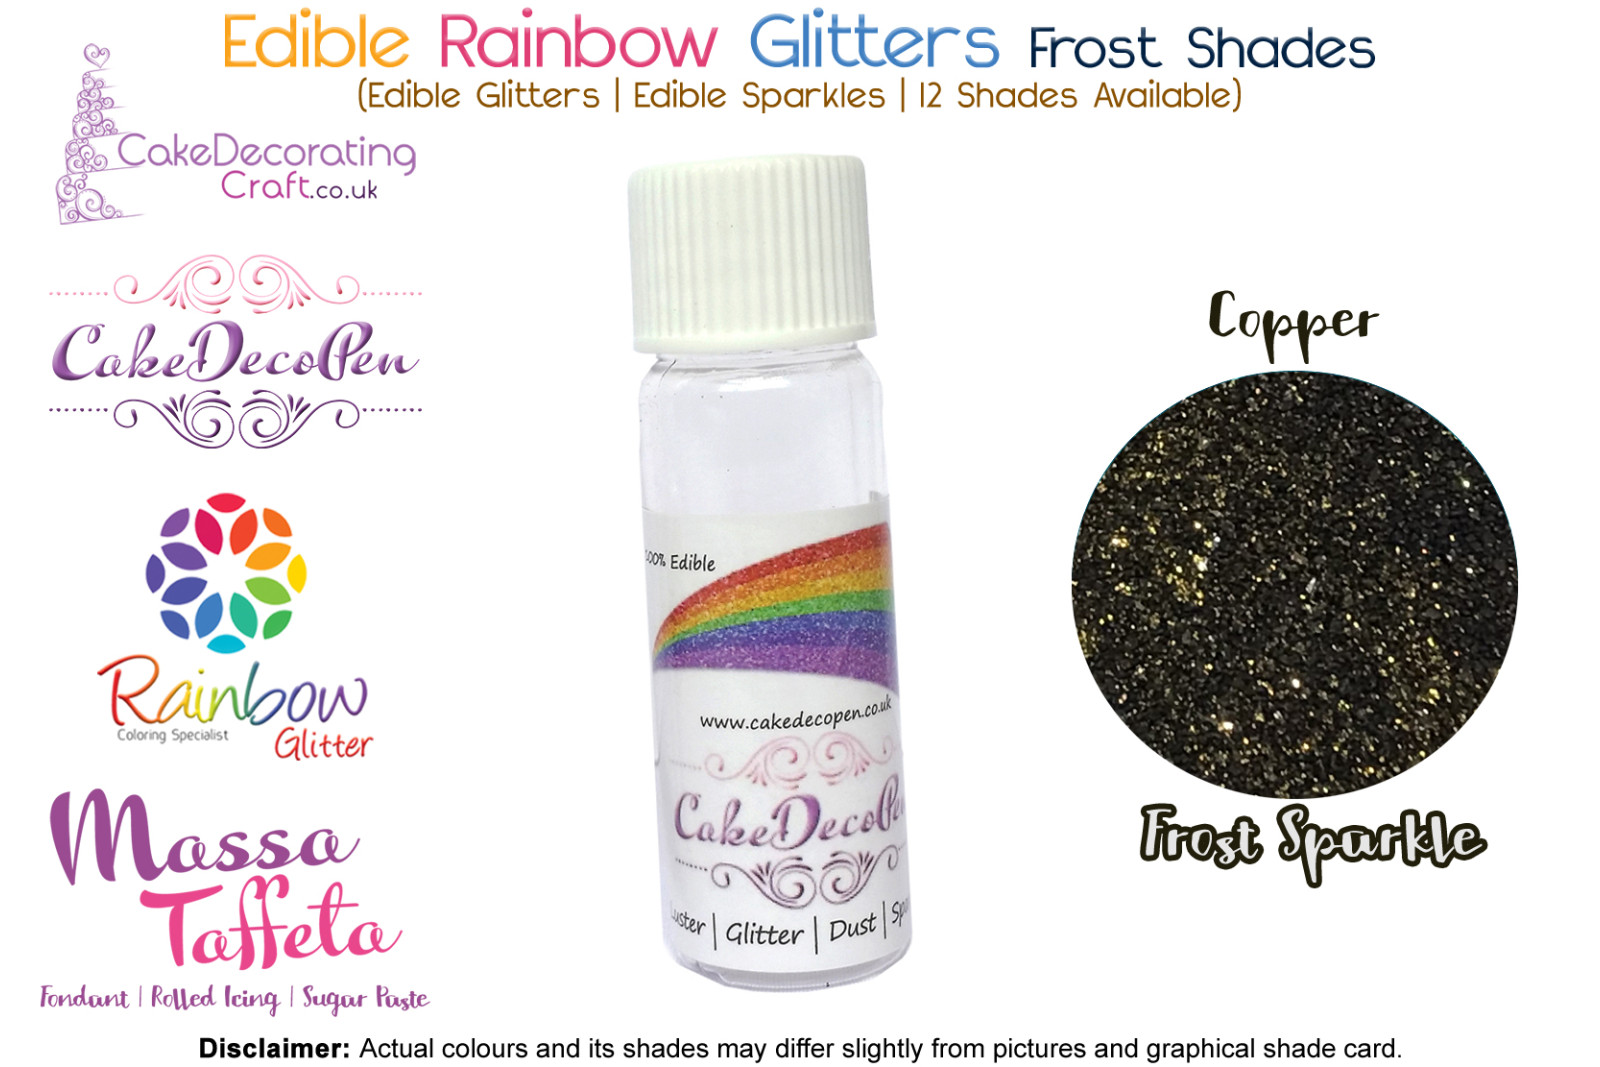 Copper | Rainbow Glitter | Frost Shade | 100 % Edible | Cake Decorating Craft | 8 Grams